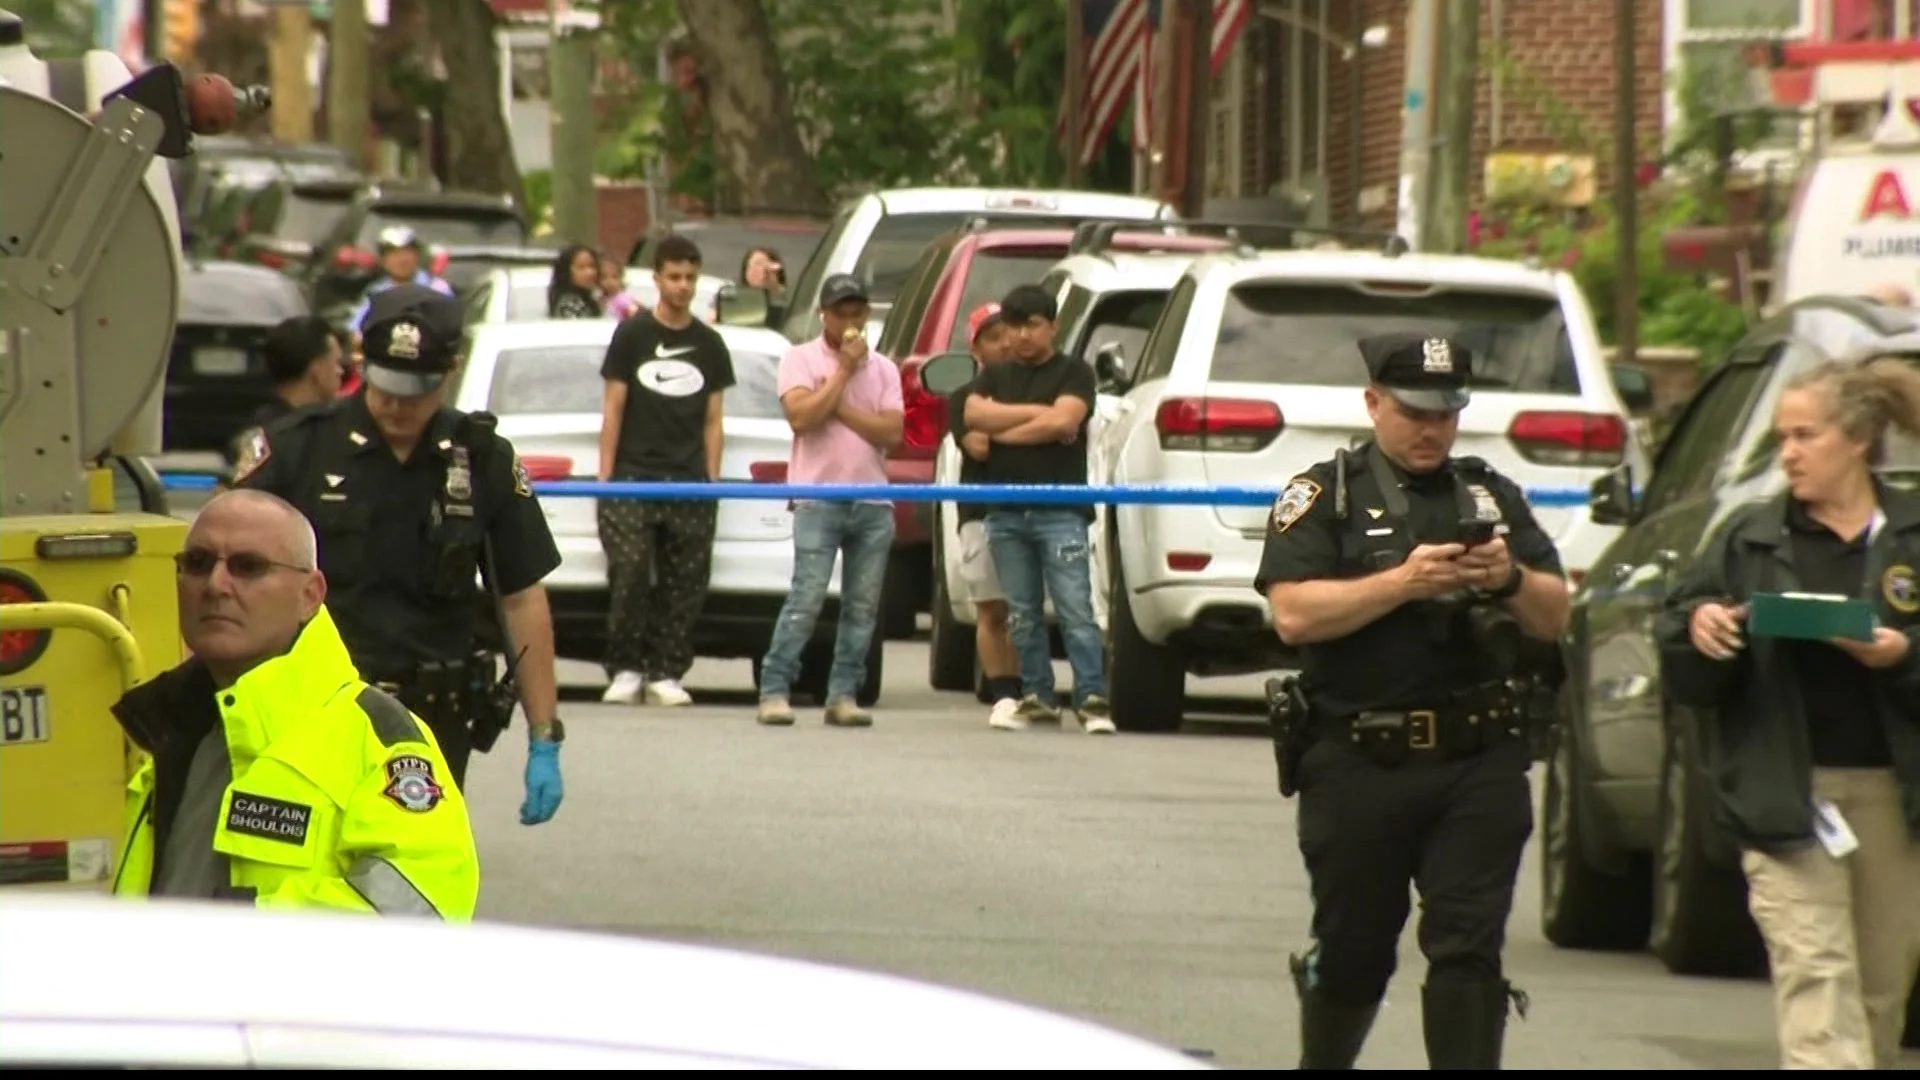 Officials: Man struck and killed by DOT truck in Bay Ridge – News 12 Brooklyn